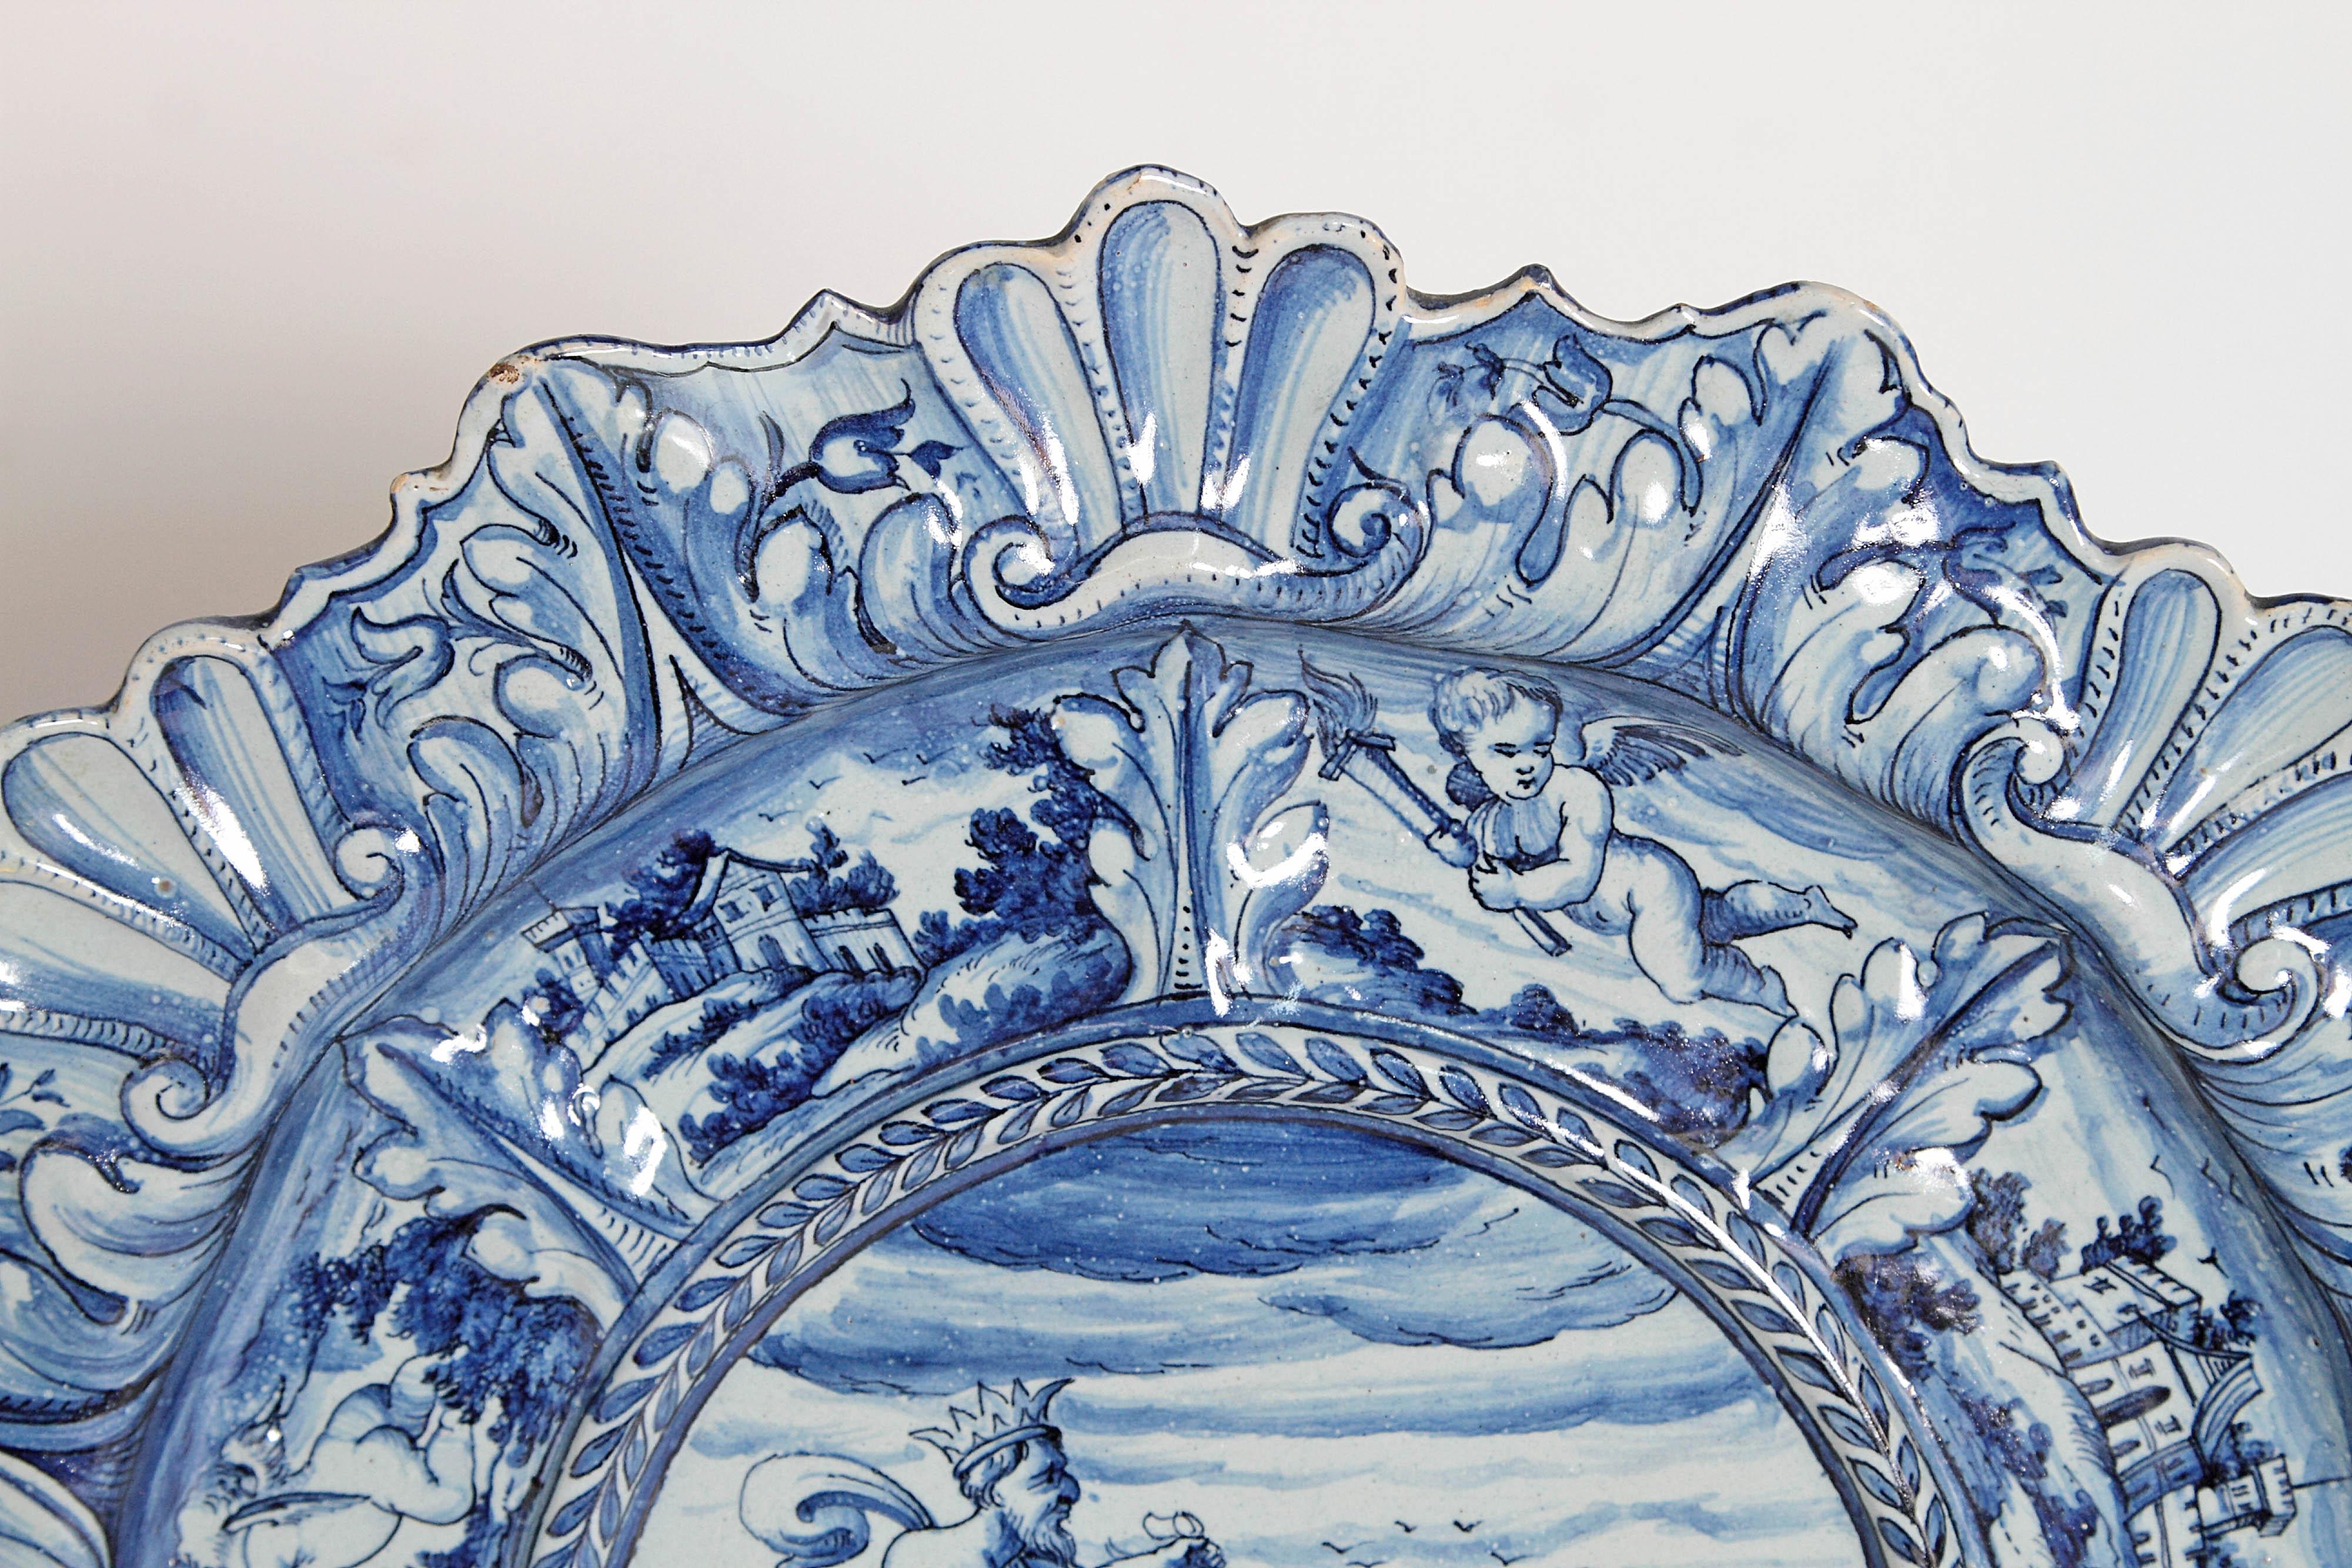 Mid-19th Century Blue and White Delft Italian Charger (Neoklassisch)